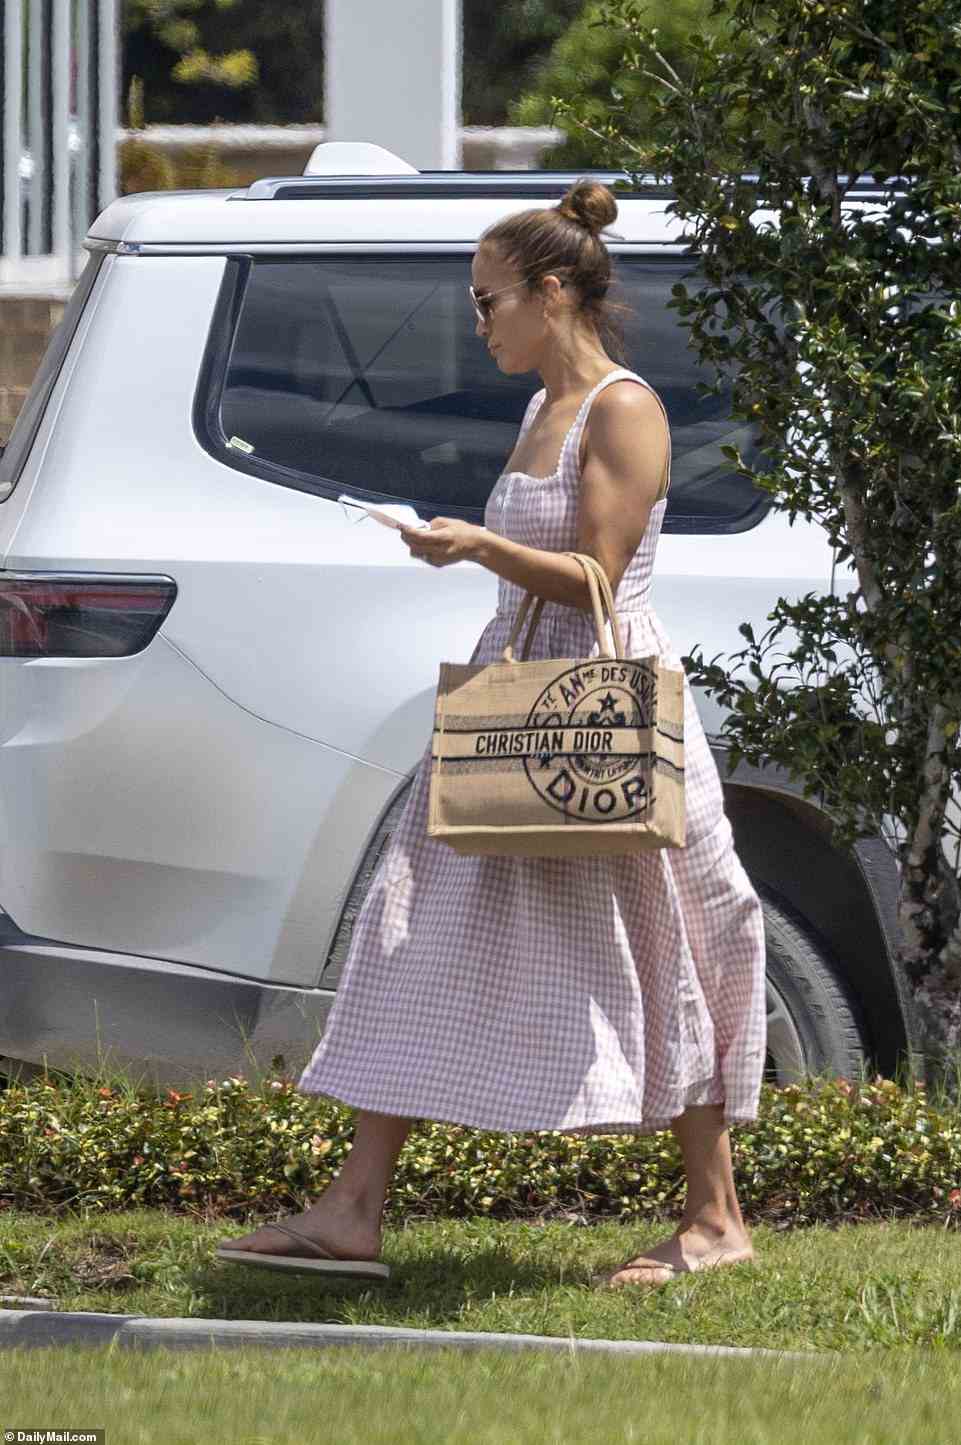 J.Lo arrived carrying a Dior bag, downcast and wearing a summer dress after the medical emergency at the property where she and Ben are celebrating their lavish wedding this weekend